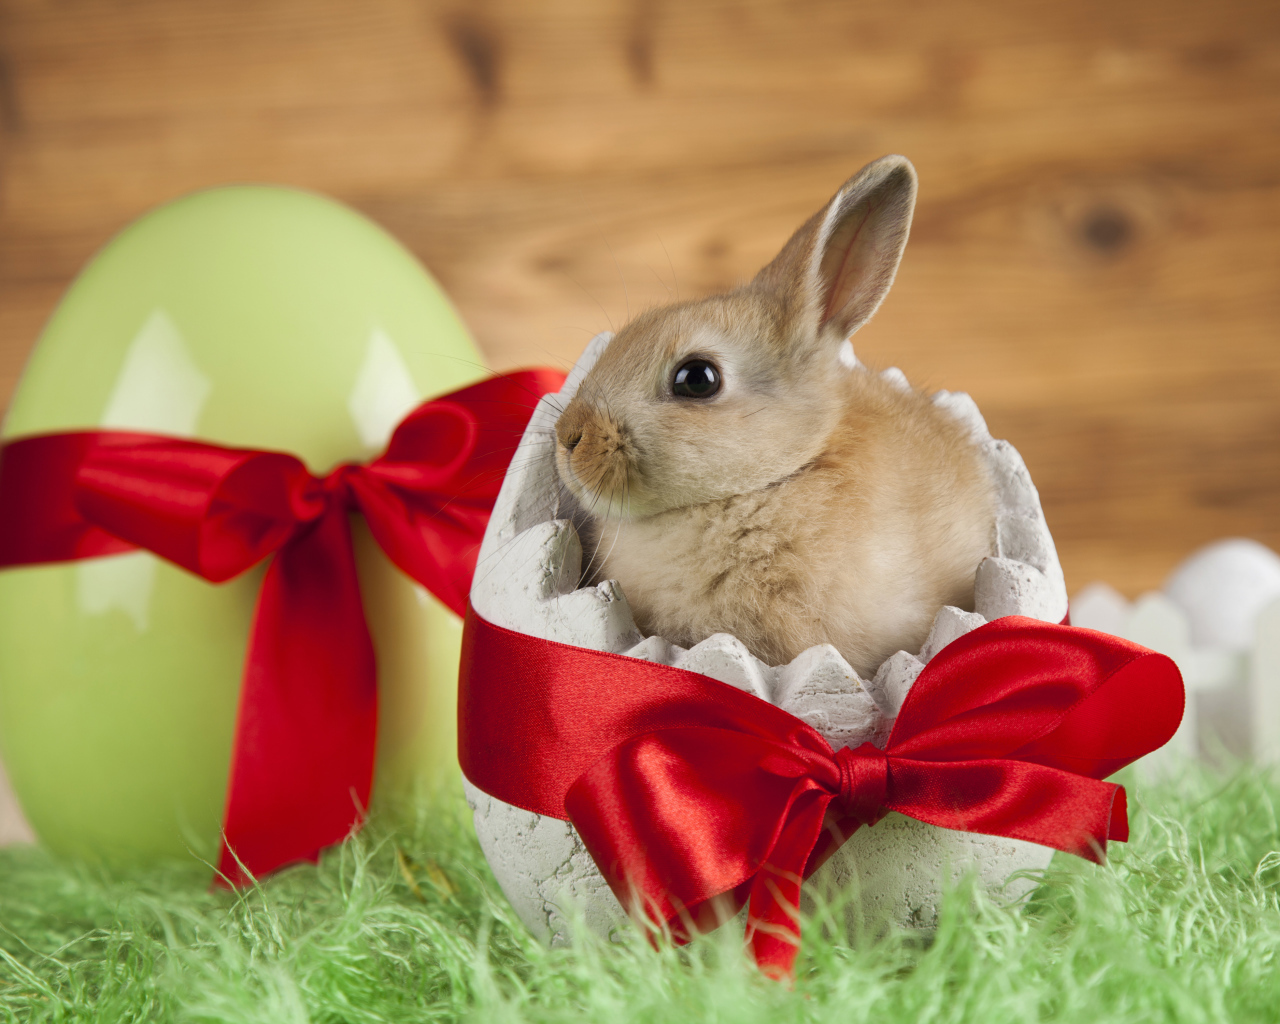 Little decorative rabbit in an egg with a red bow